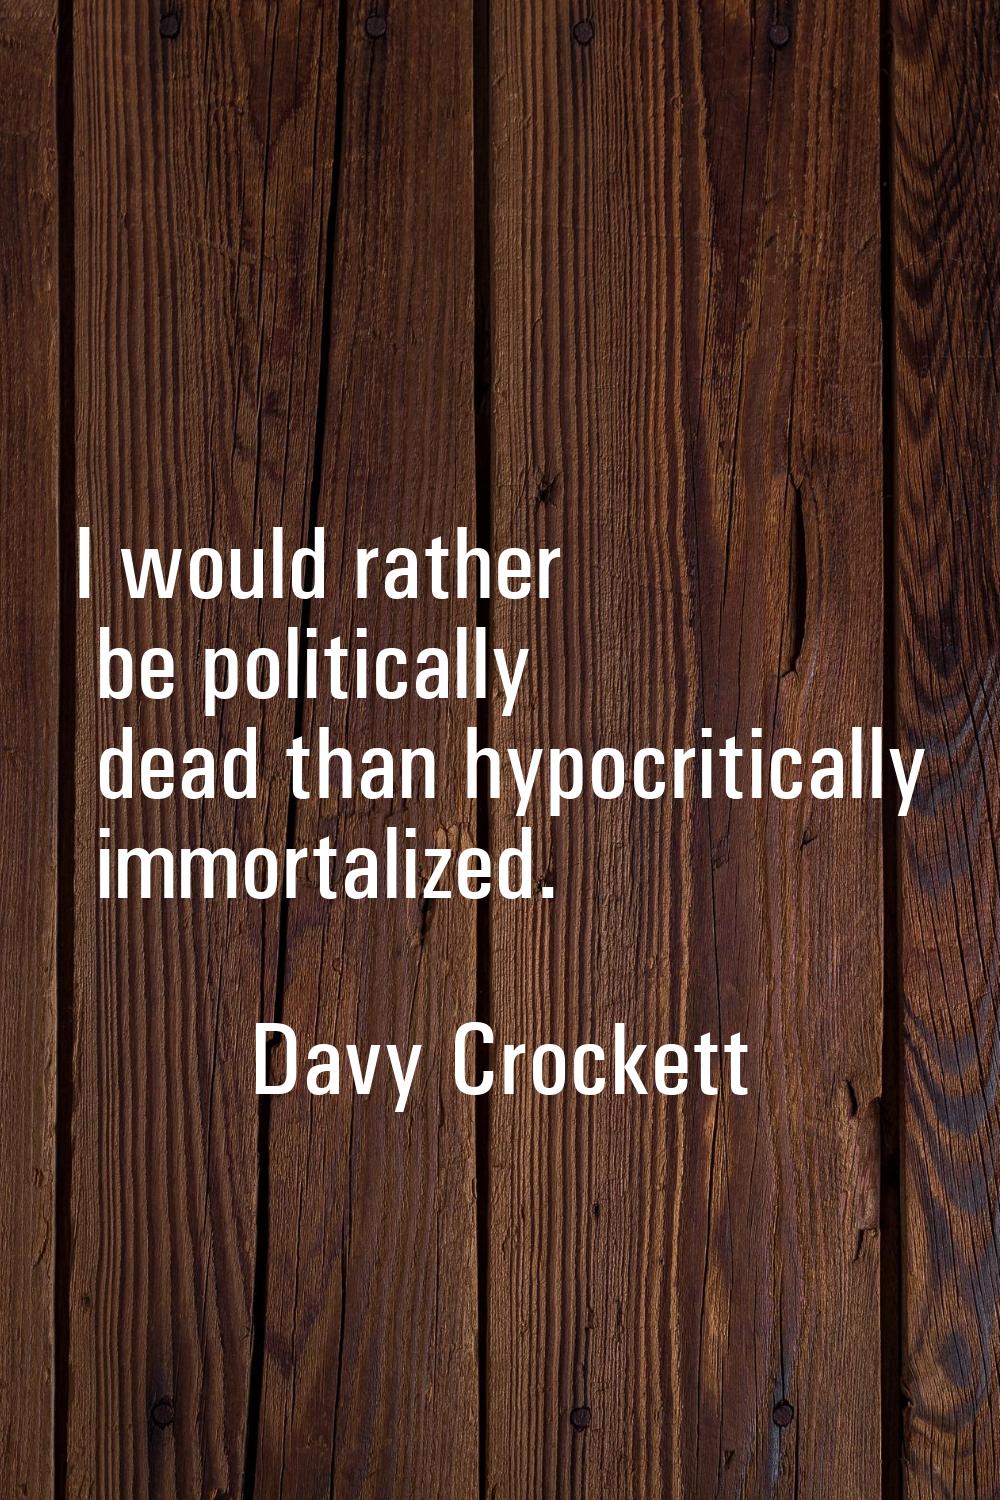 I would rather be politically dead than hypocritically immortalized.